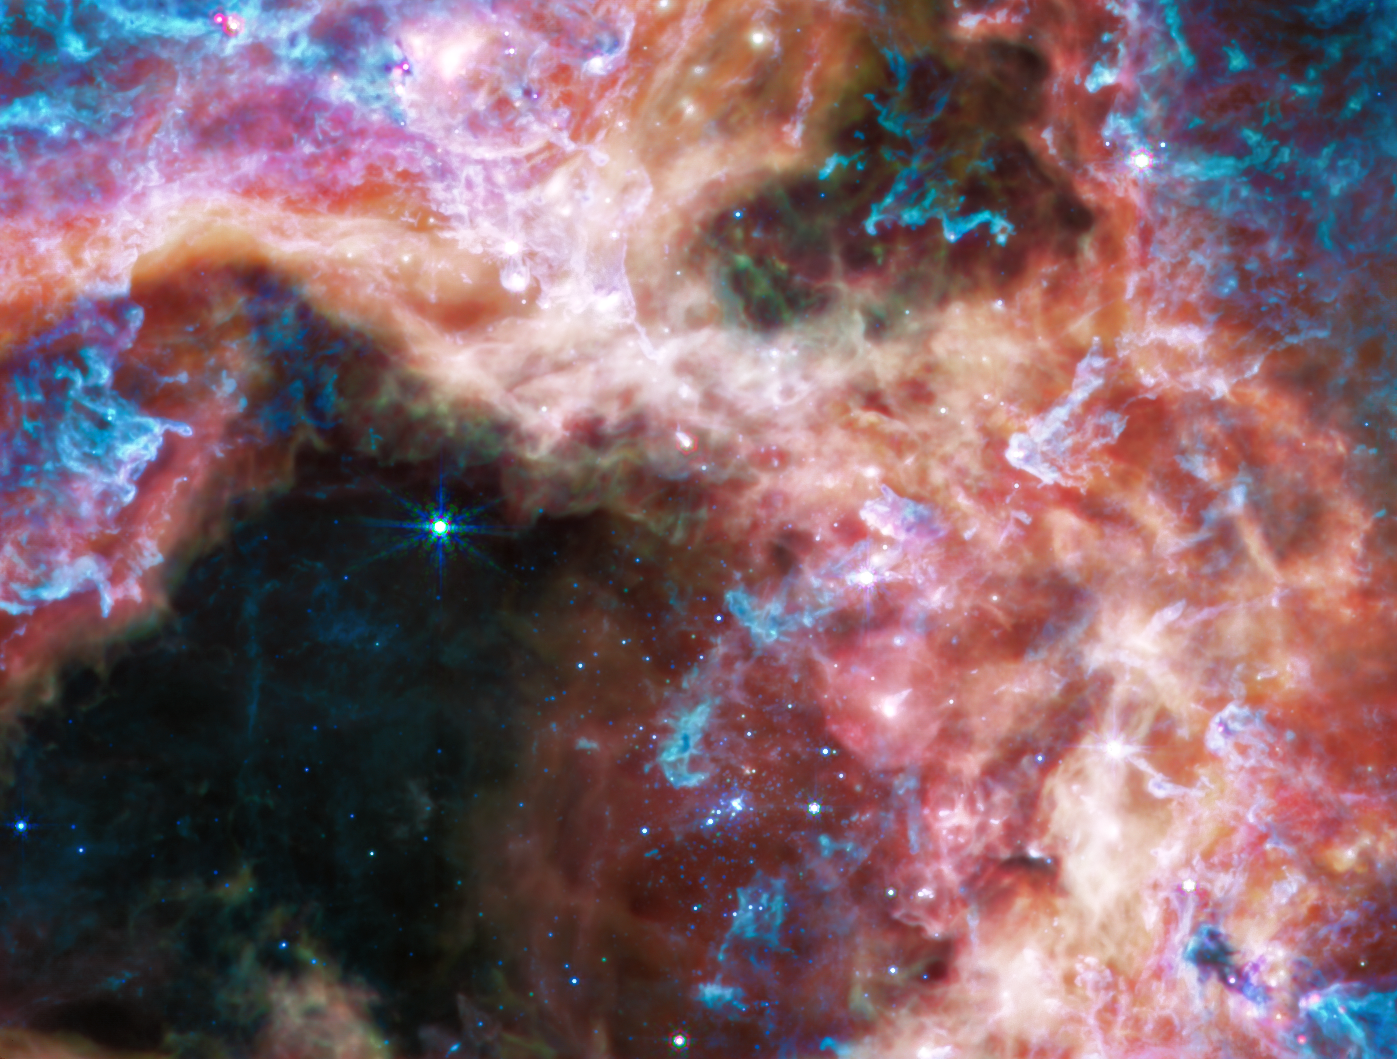 At the longer wavelengths of light captured by its Mid-Infrared Instrument (MIRI), Webb focuses on the area surrounding the central star cluster and unveils a very different view of the Tarantula Nebula. In this light, the young hot stars of the cluster fade in brilliance, and glowing gas and dust come forward. Abundant hydrocarbons light up the surfaces of the dust clouds, shown in blue and purple. Much of the nebula takes on a more ghostly, diffuse appearance because mid-infrared light is able to show more of what is happening deeper inside the clouds. Still-embedded protostars pop into view within their dusty cocoons, including a bright group at the very top edge of the image, left of center. Other areas appear dark, like in the lower-right corner of the image. This indicates the densest areas of dust in the nebula, that even mid-infrared wavelengths cannot penetrate. These could be the sites of future, or current, star formation. Image: NASA, ESA, CSA, STScI, Webb ERO Production Team